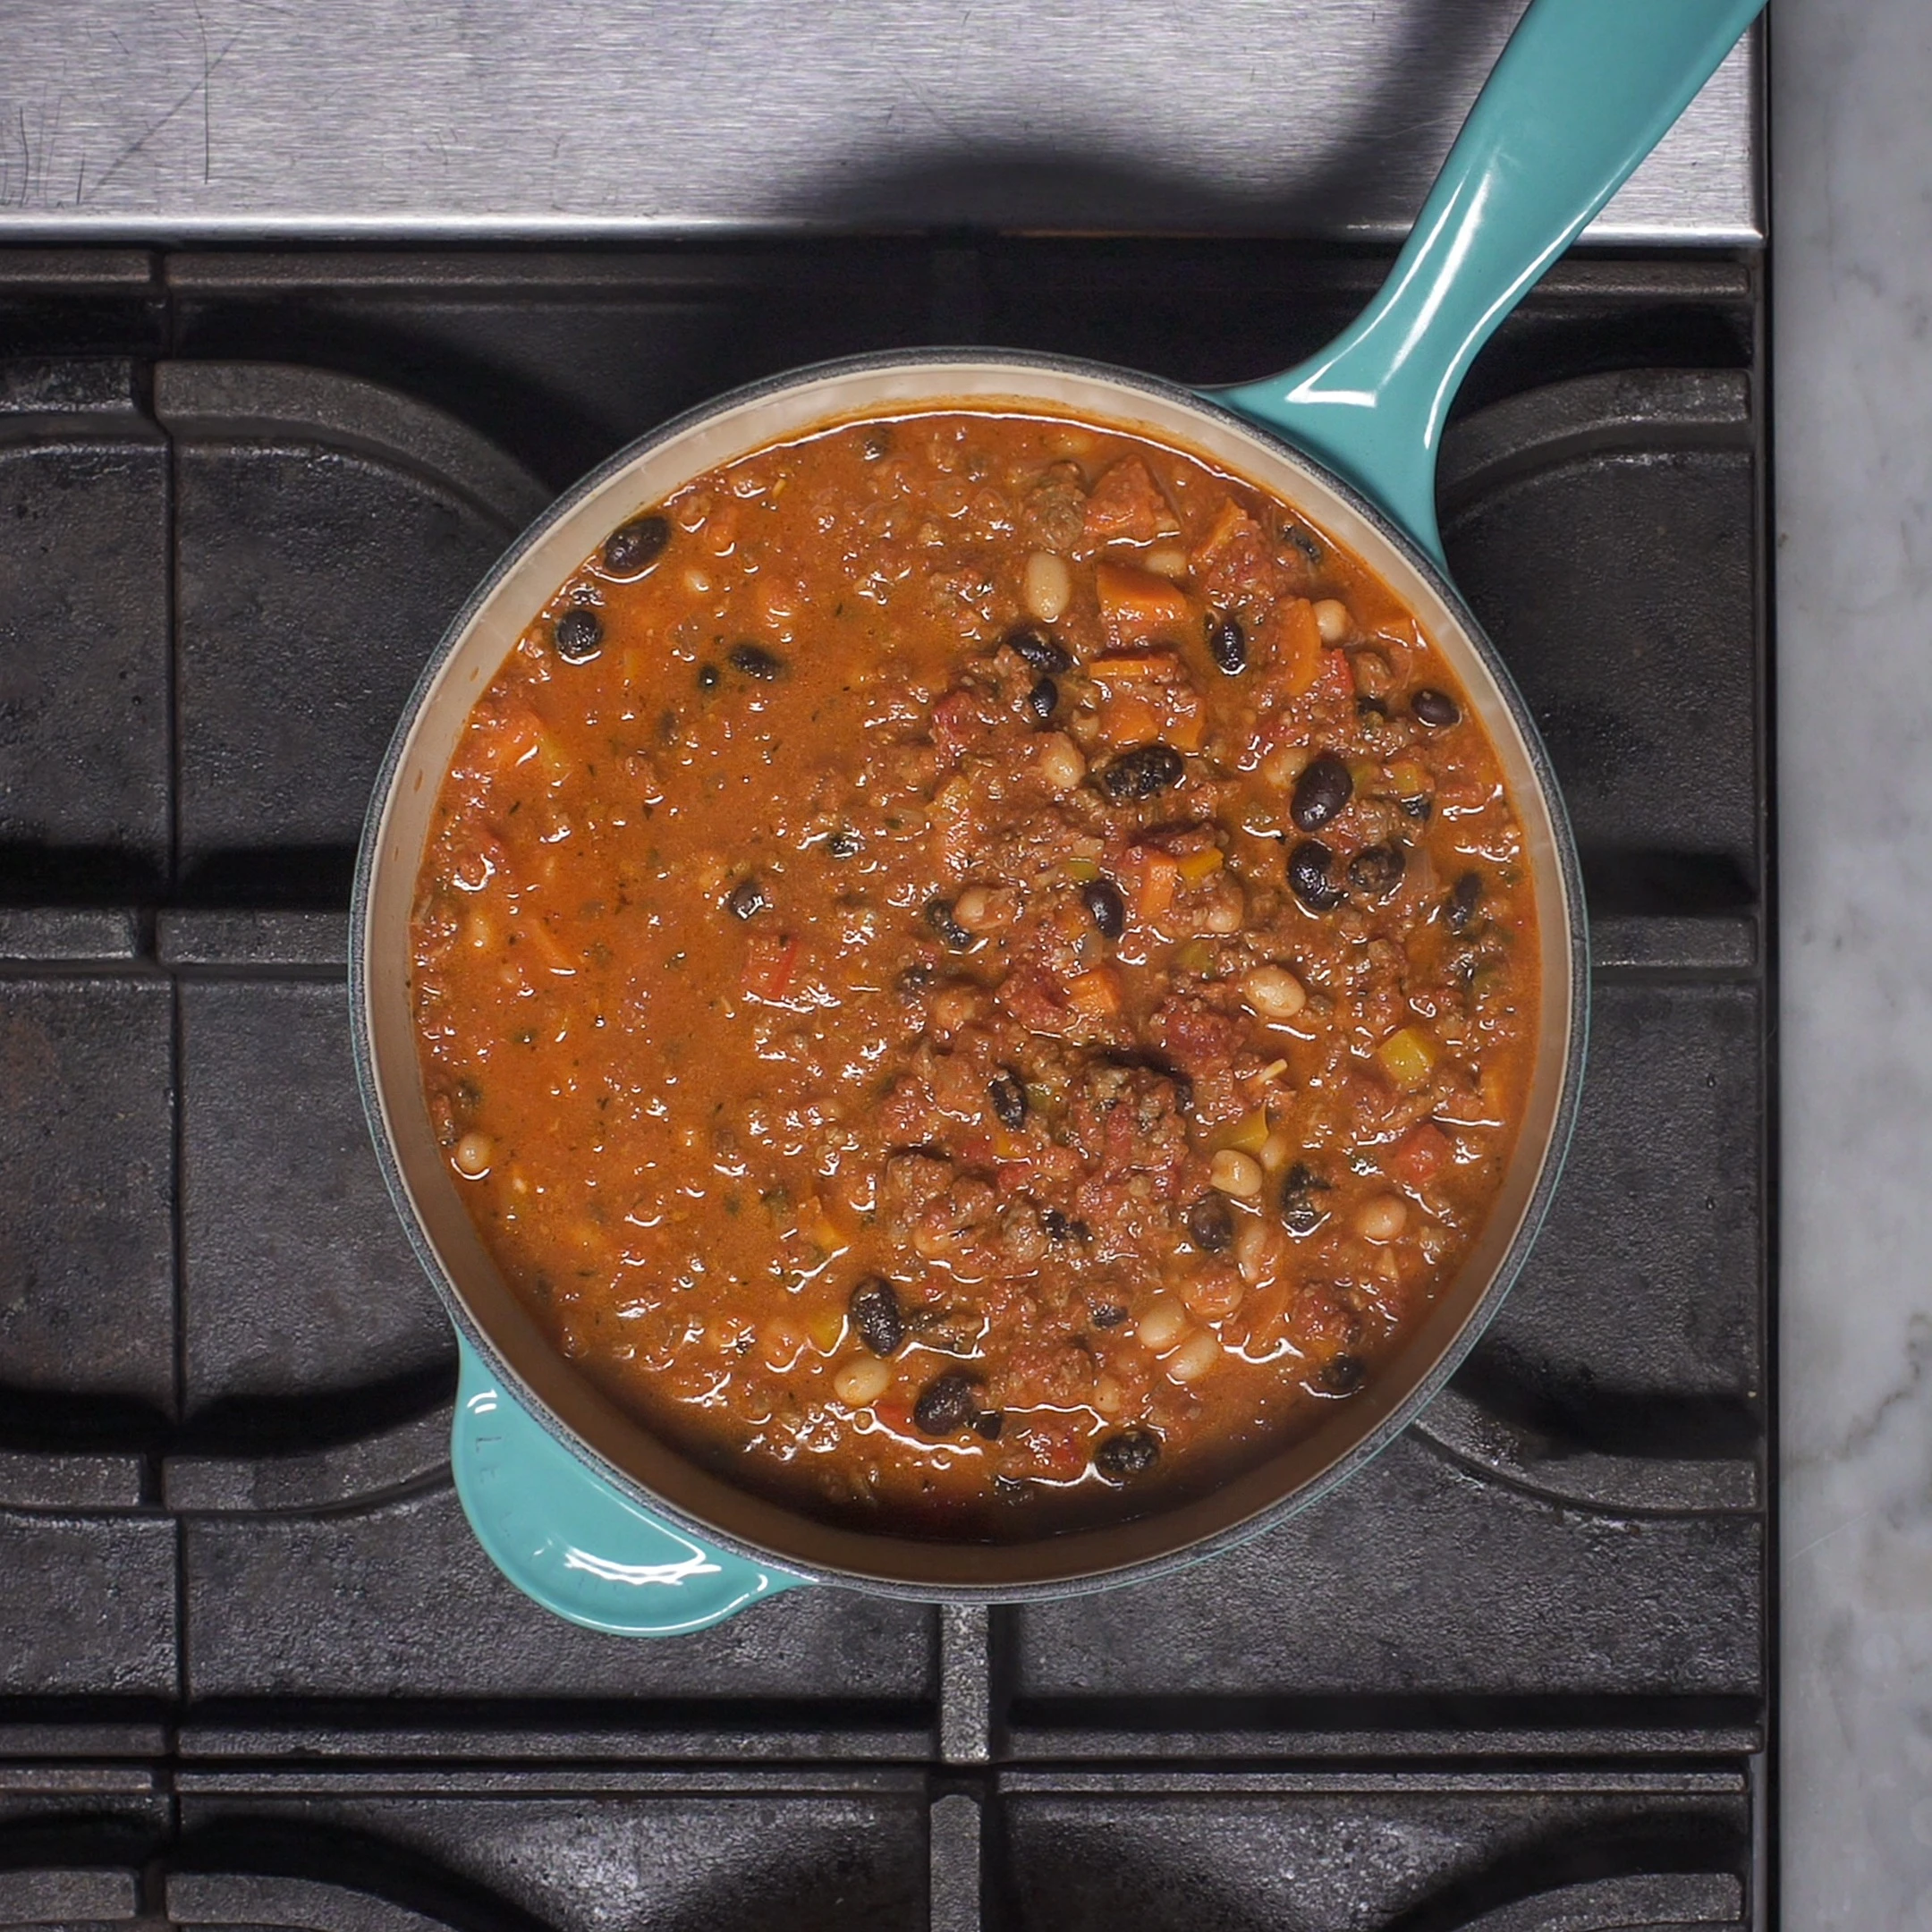 Image of chili made with Impossible burger cooking on the stove in a big pot